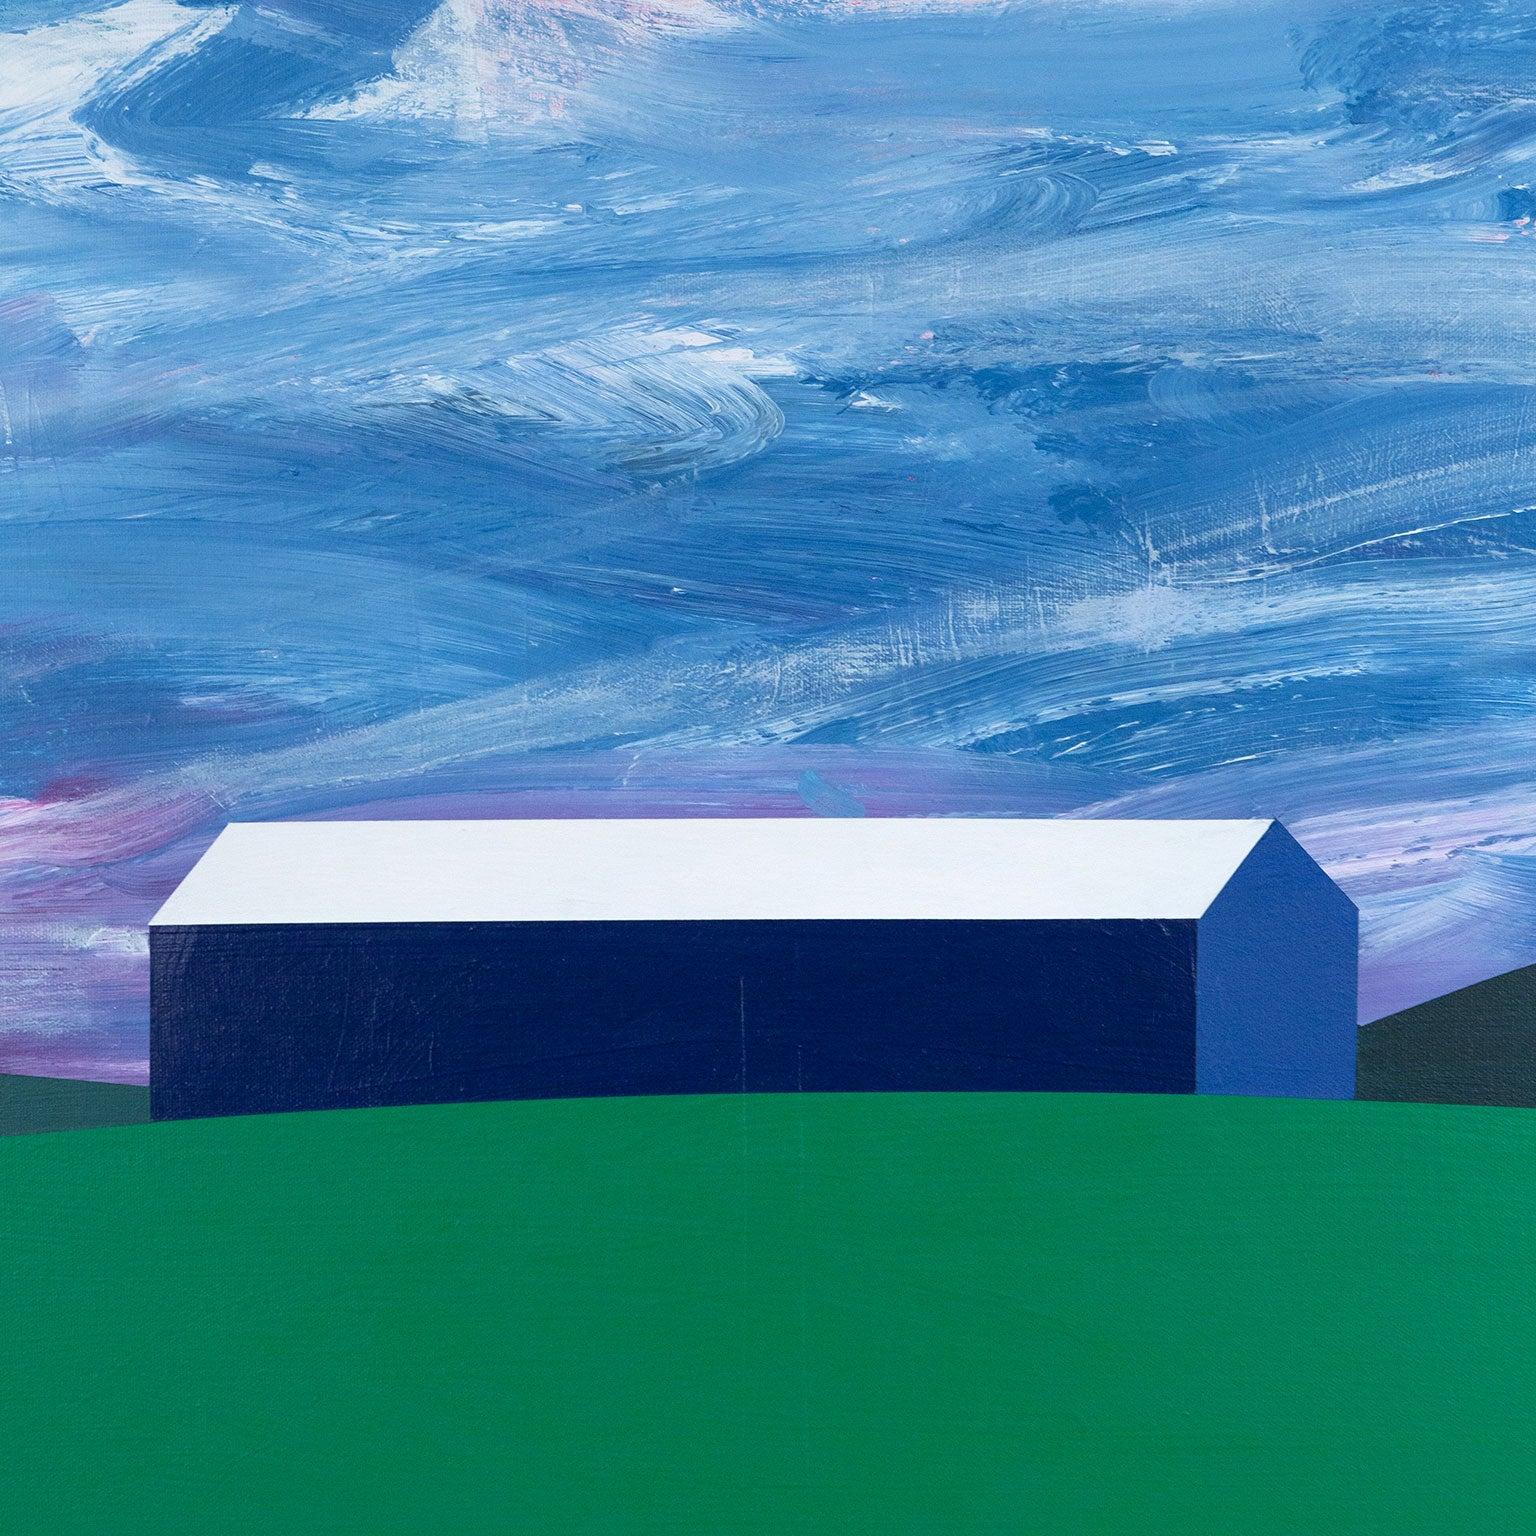 Charles Pachter (b. 1942) is one of the most collected and cherished Canadian artists. His iconic, uplifting, and patriotic images have independently earned their place in the nation's museums and the Canadian art canon. 

The barn, along with Queen